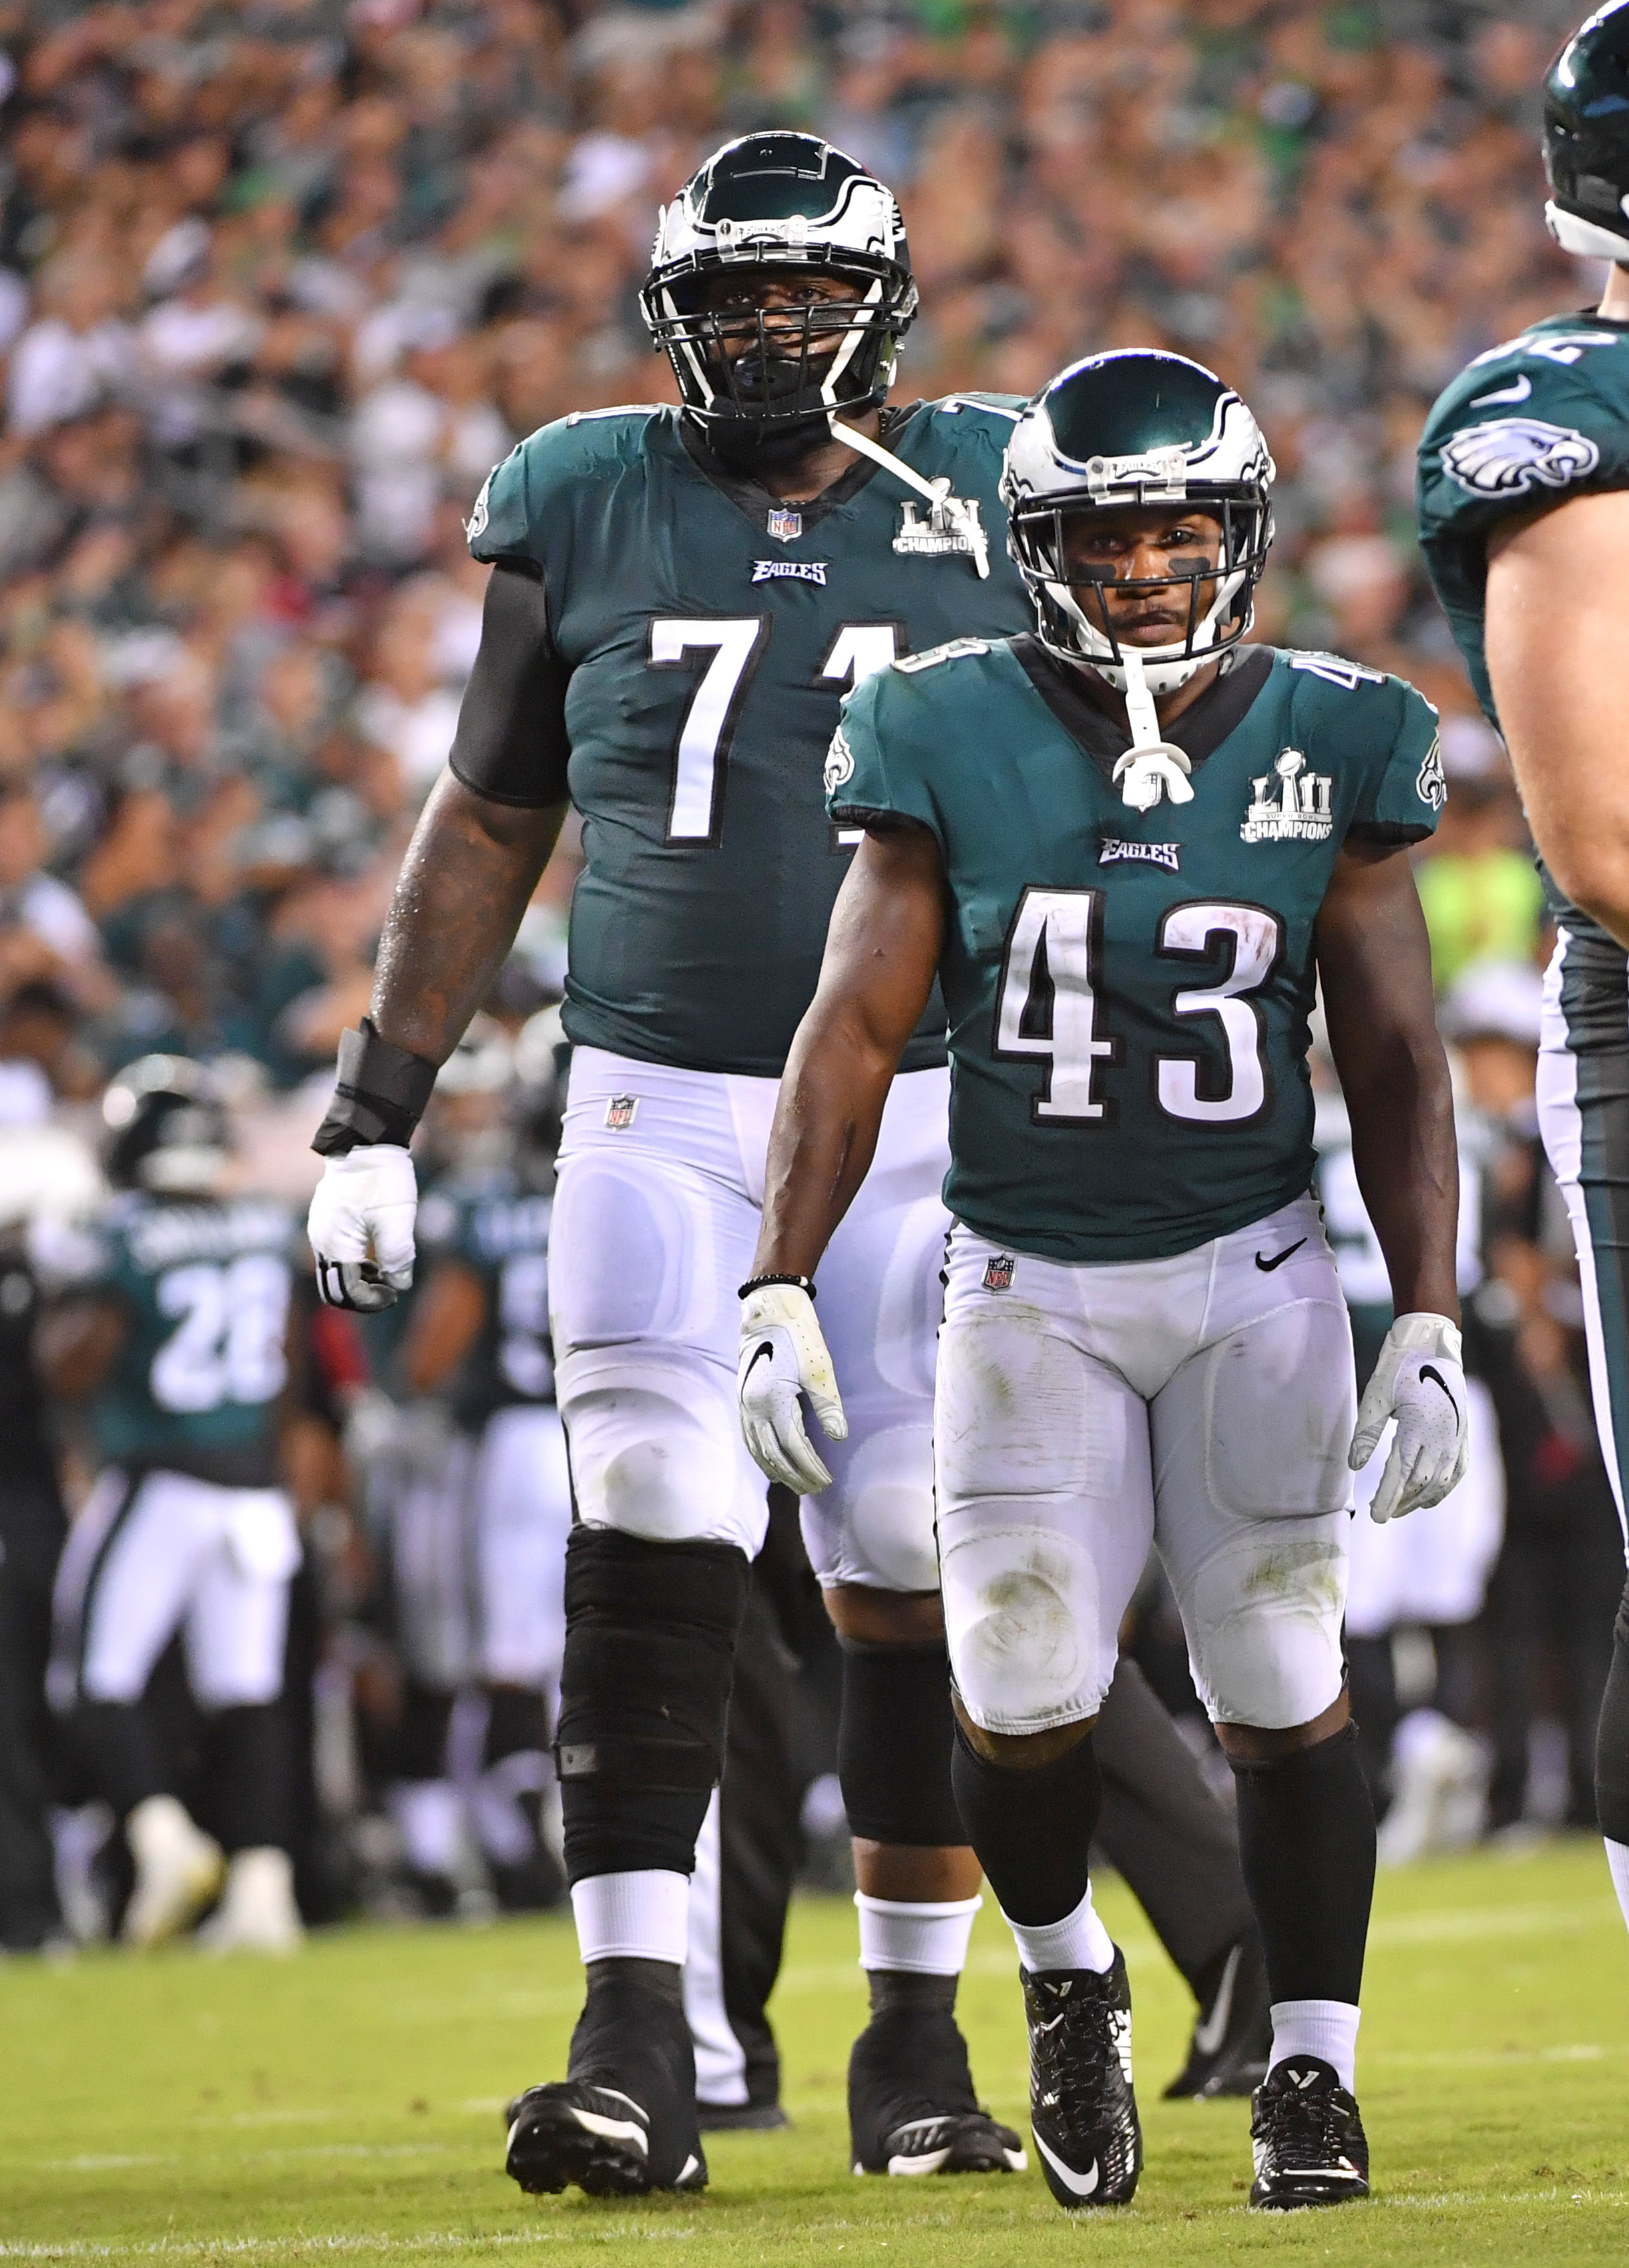 Do the Eagles Need to Get Younger? An Investigation…